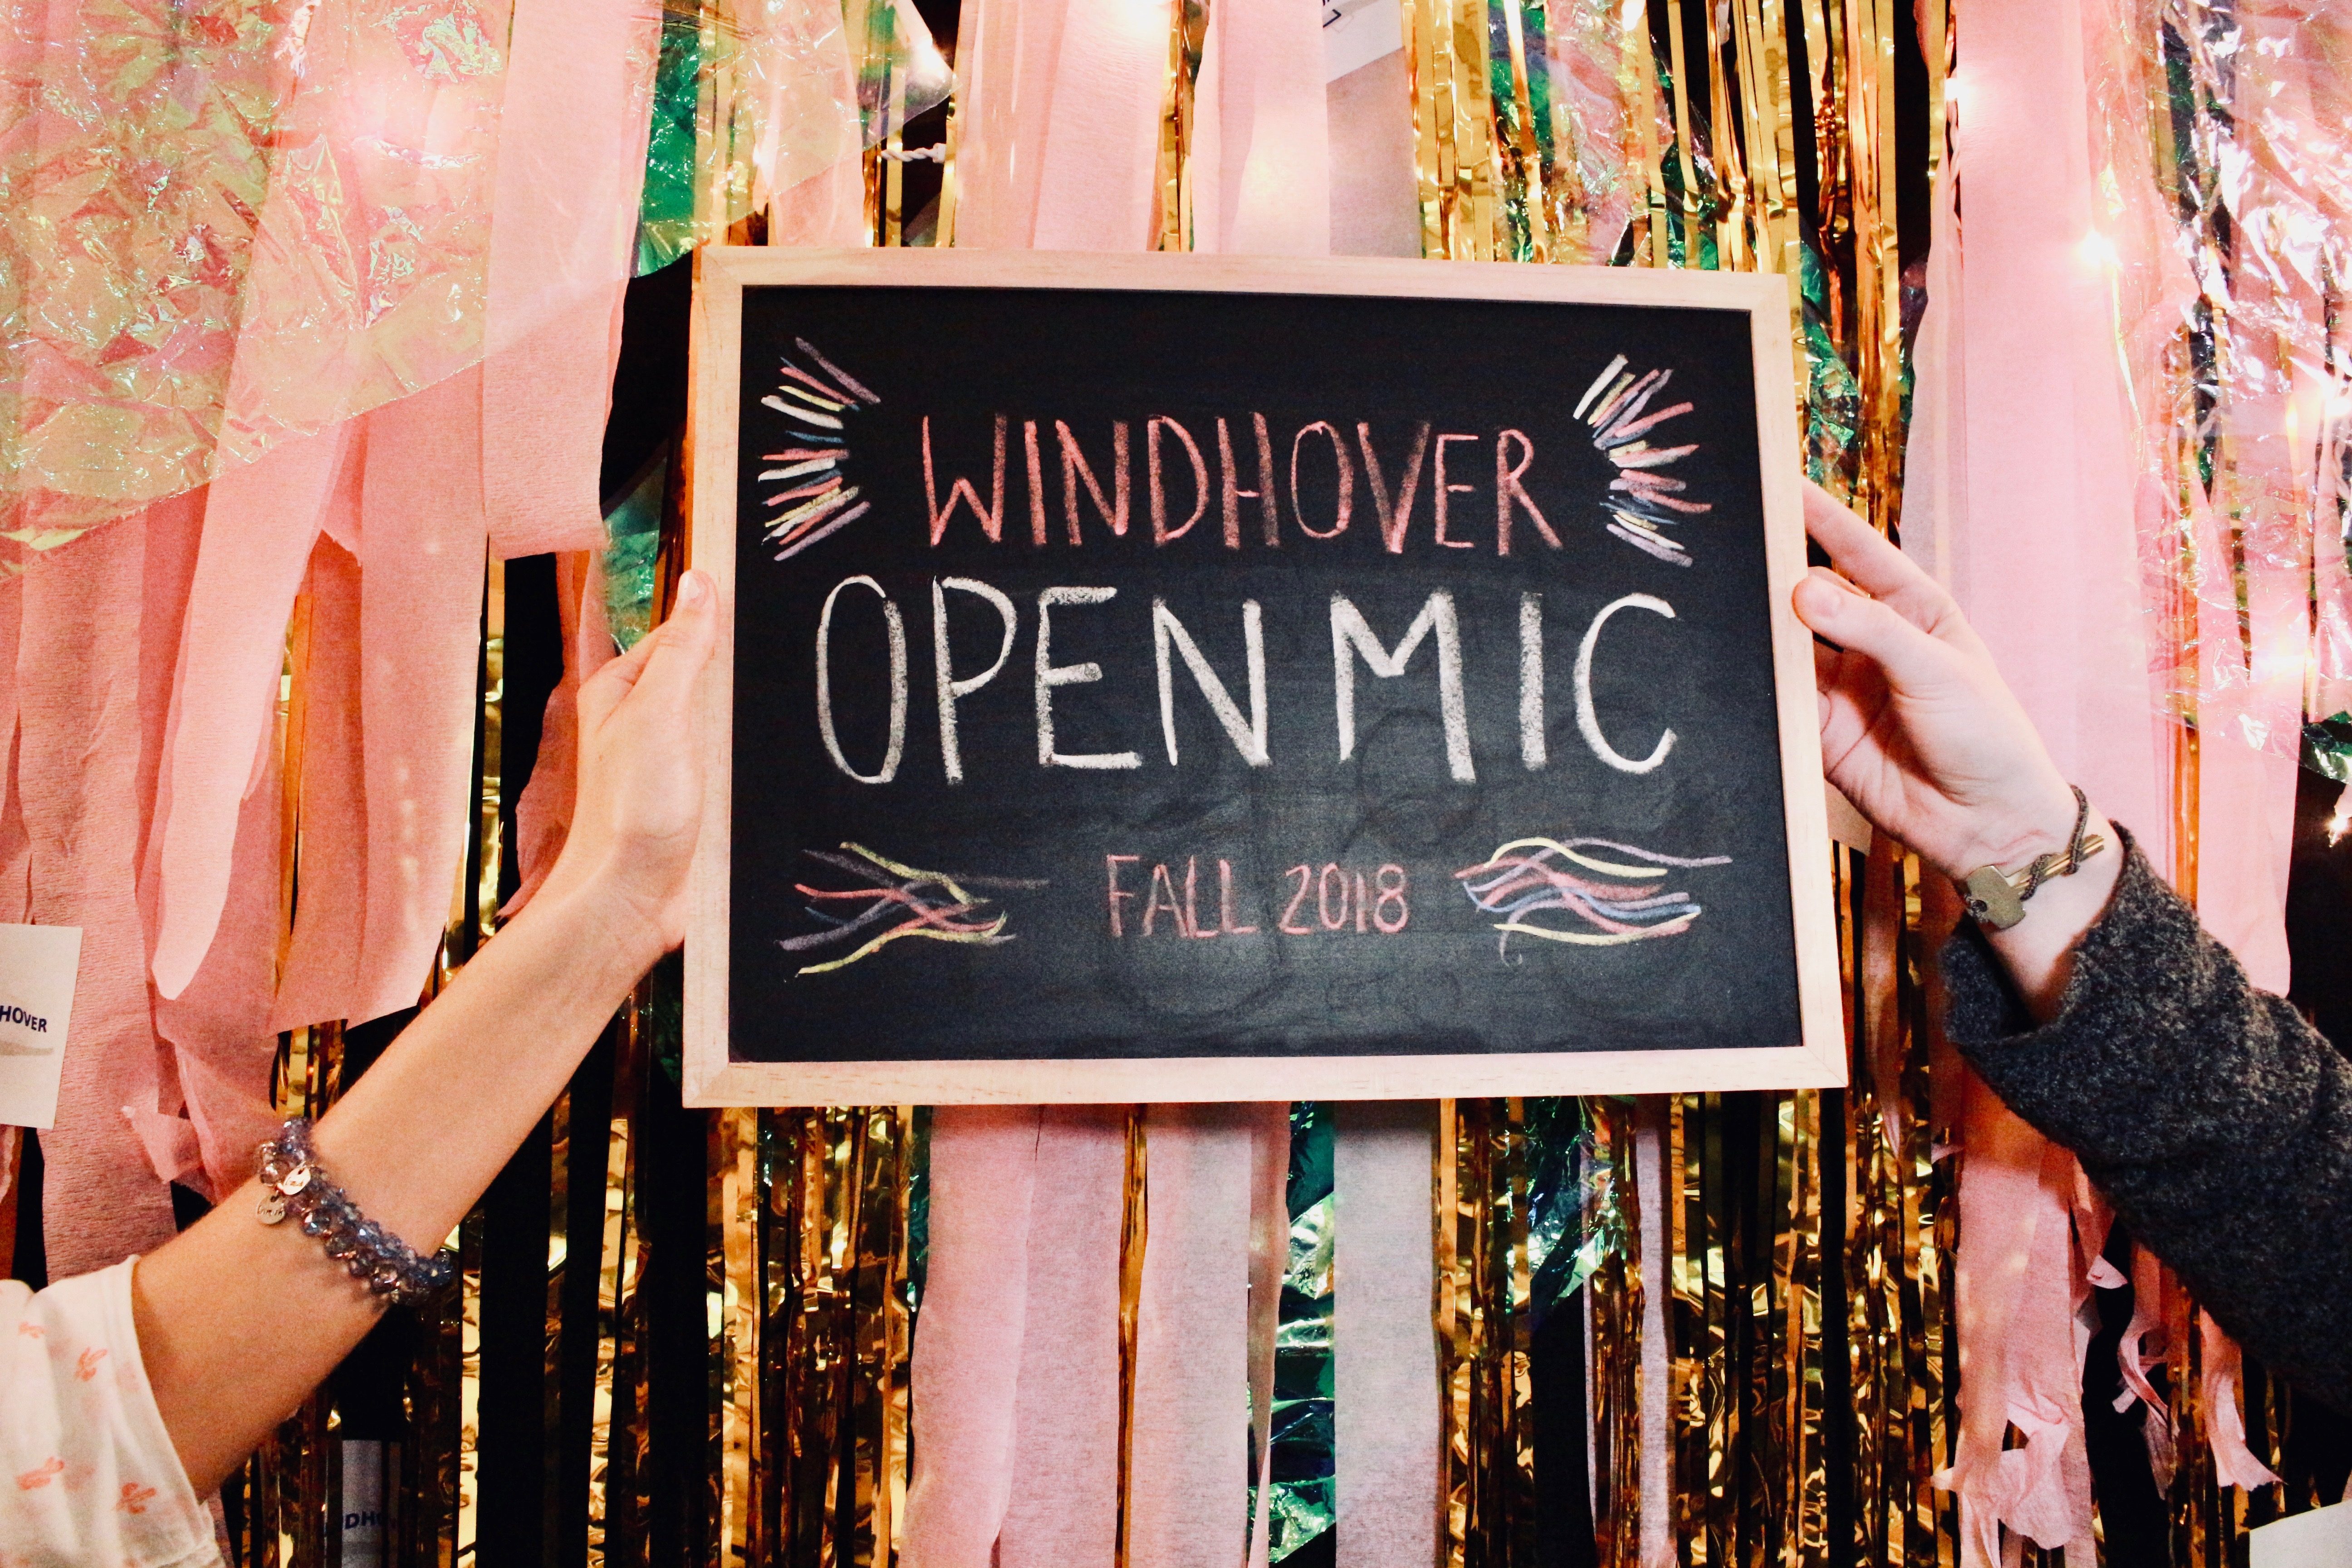 Windhover Open Mic Fall 2018